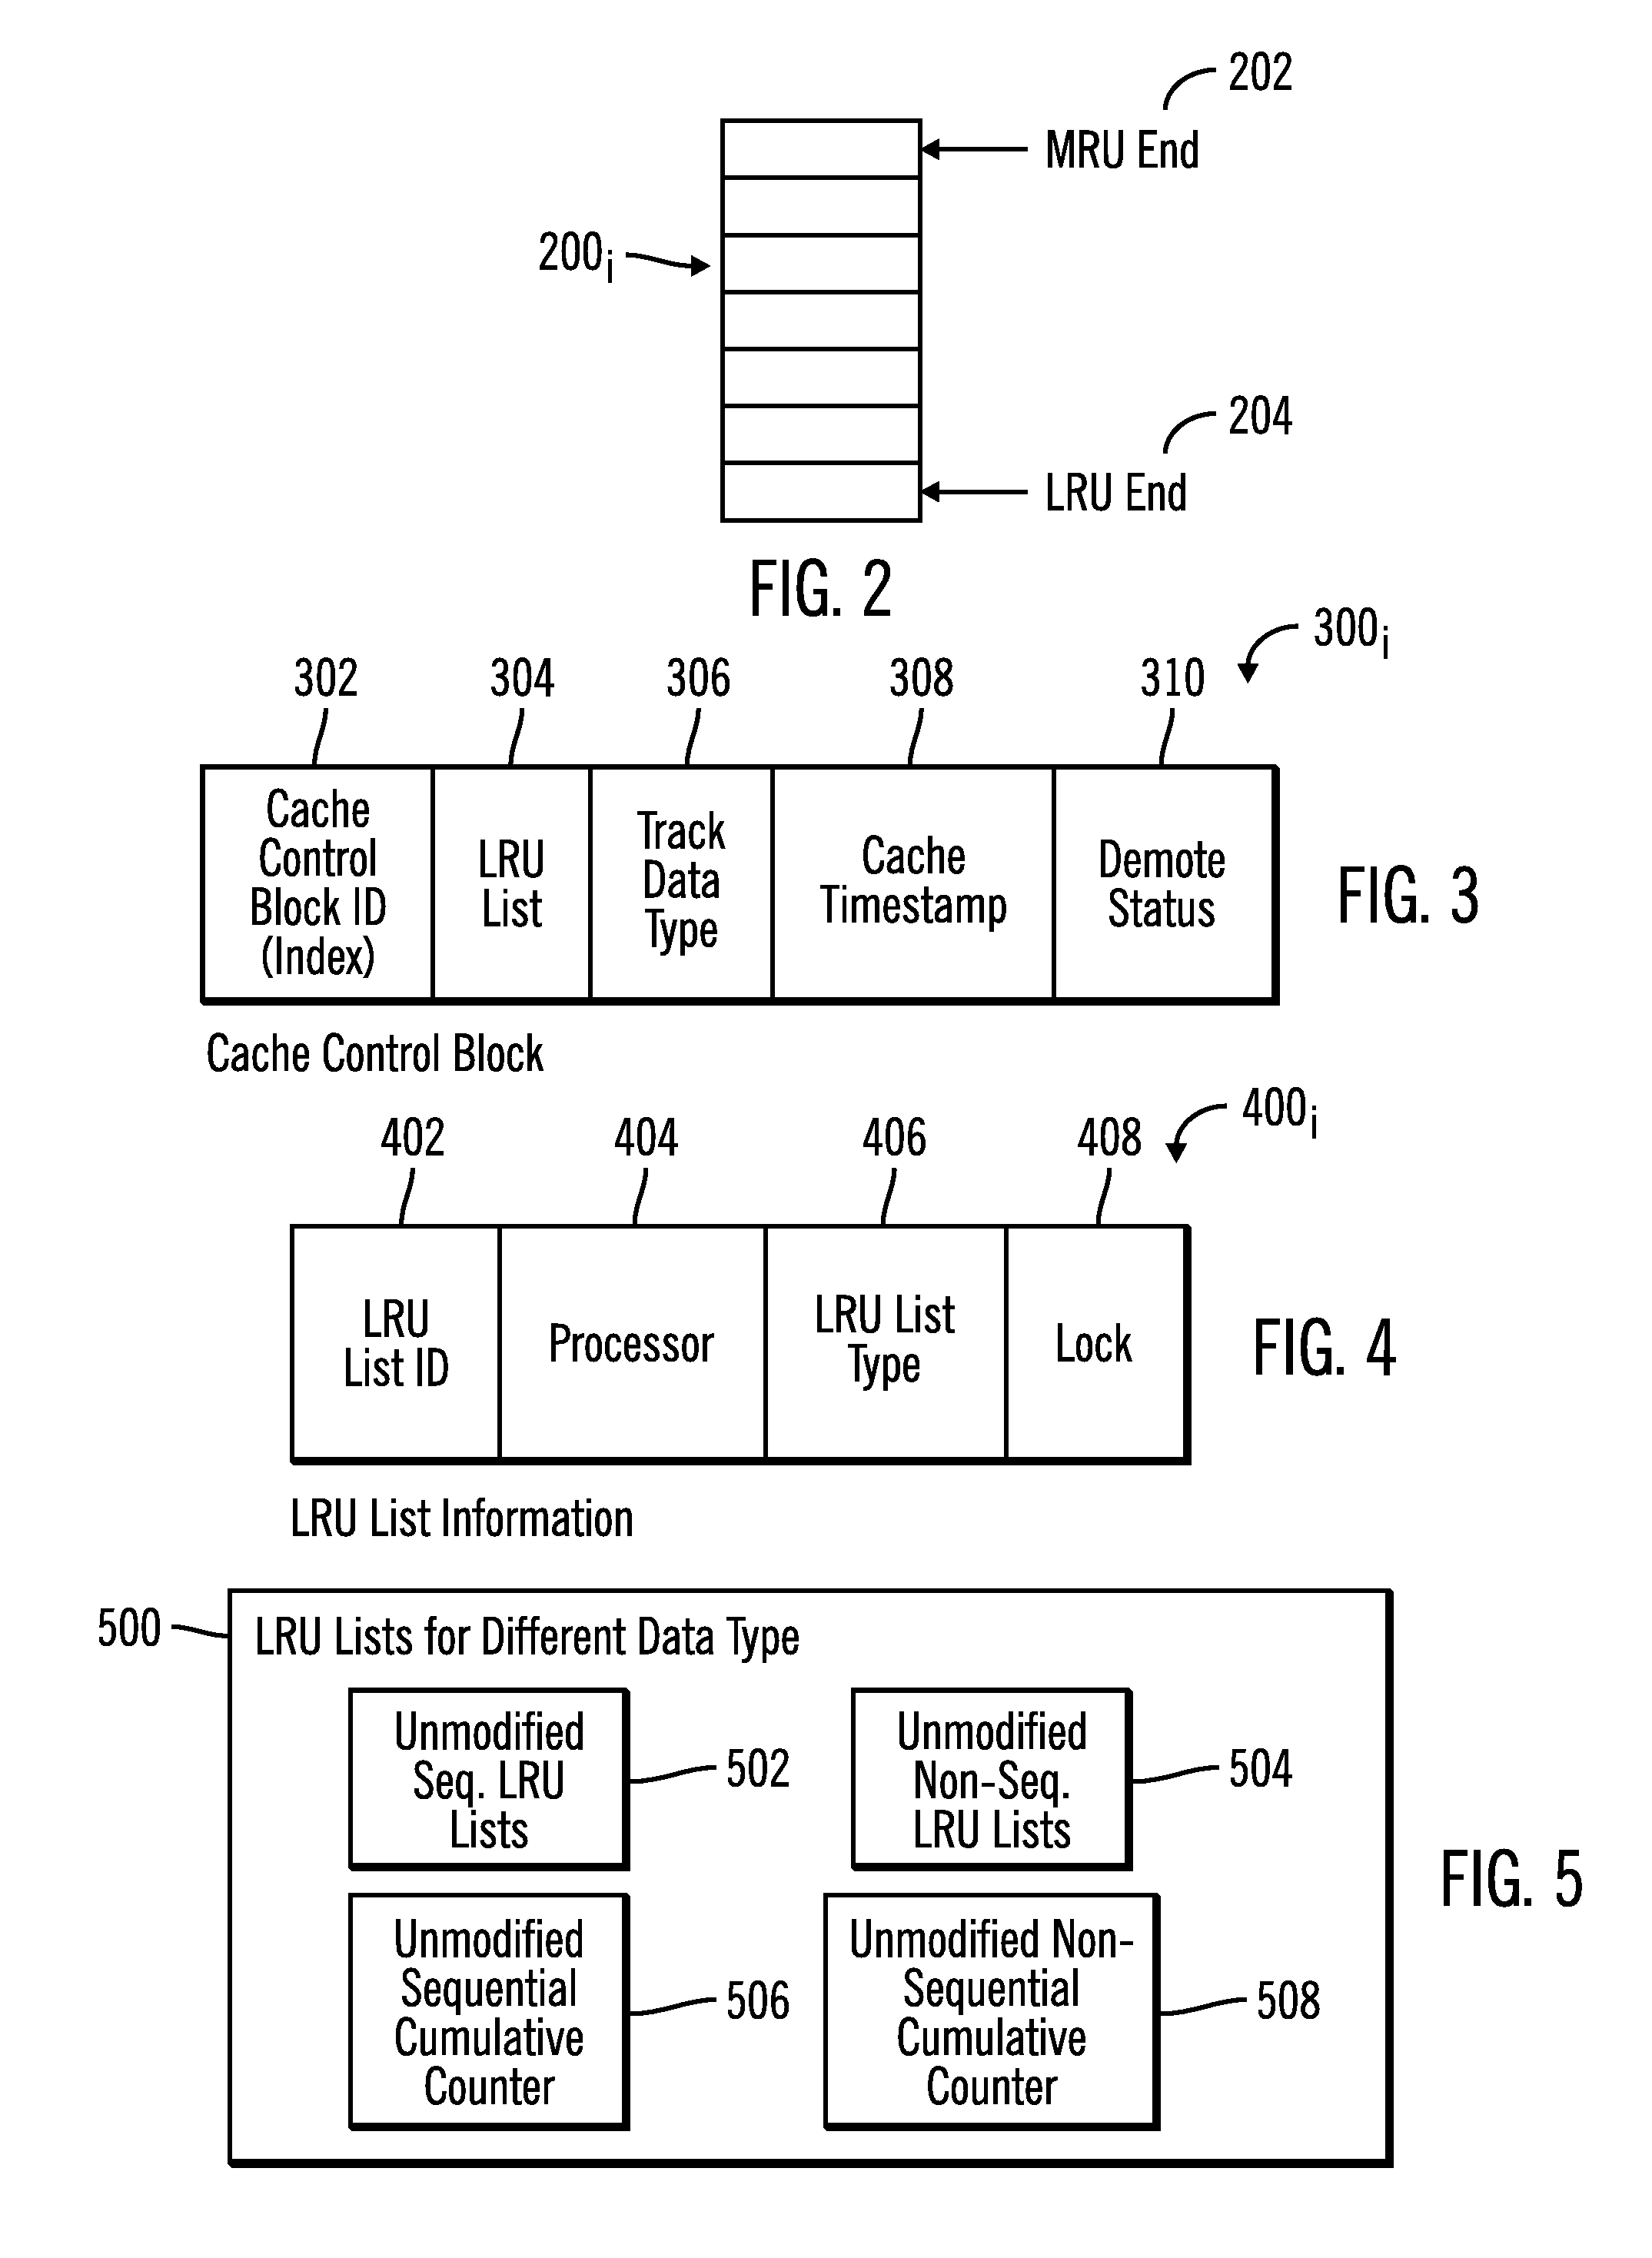 Assigning cache control blocks and cache lists to multiple processors to cache and demote tracks in a storage system